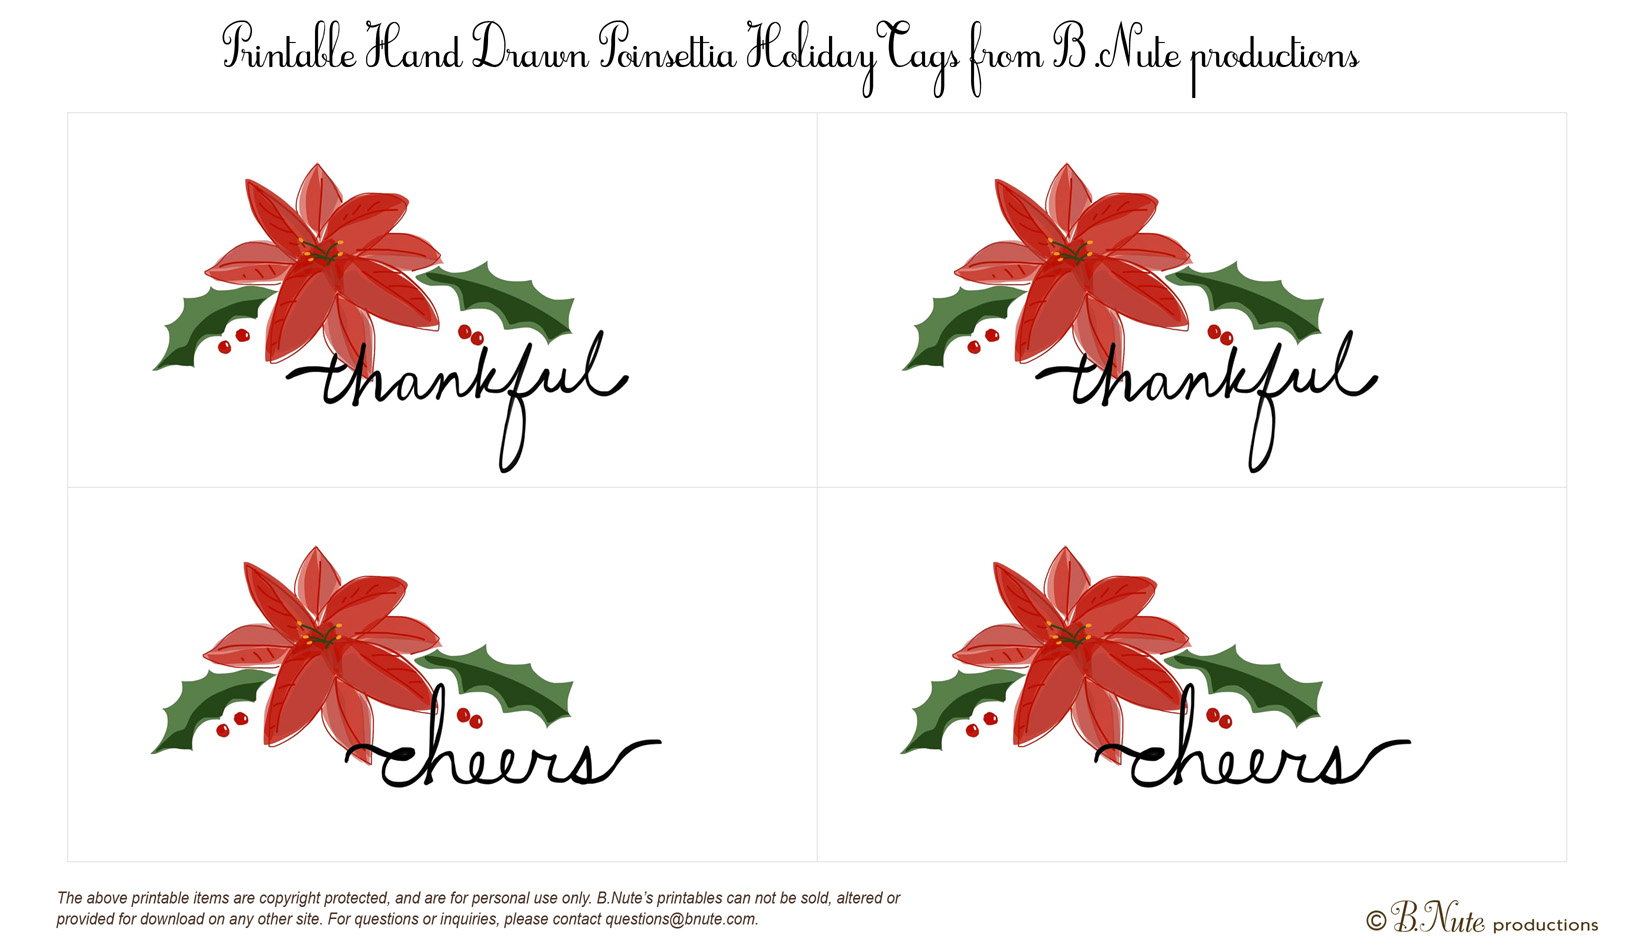 bnute productions Free Printable Poinsettia Holiday Tags